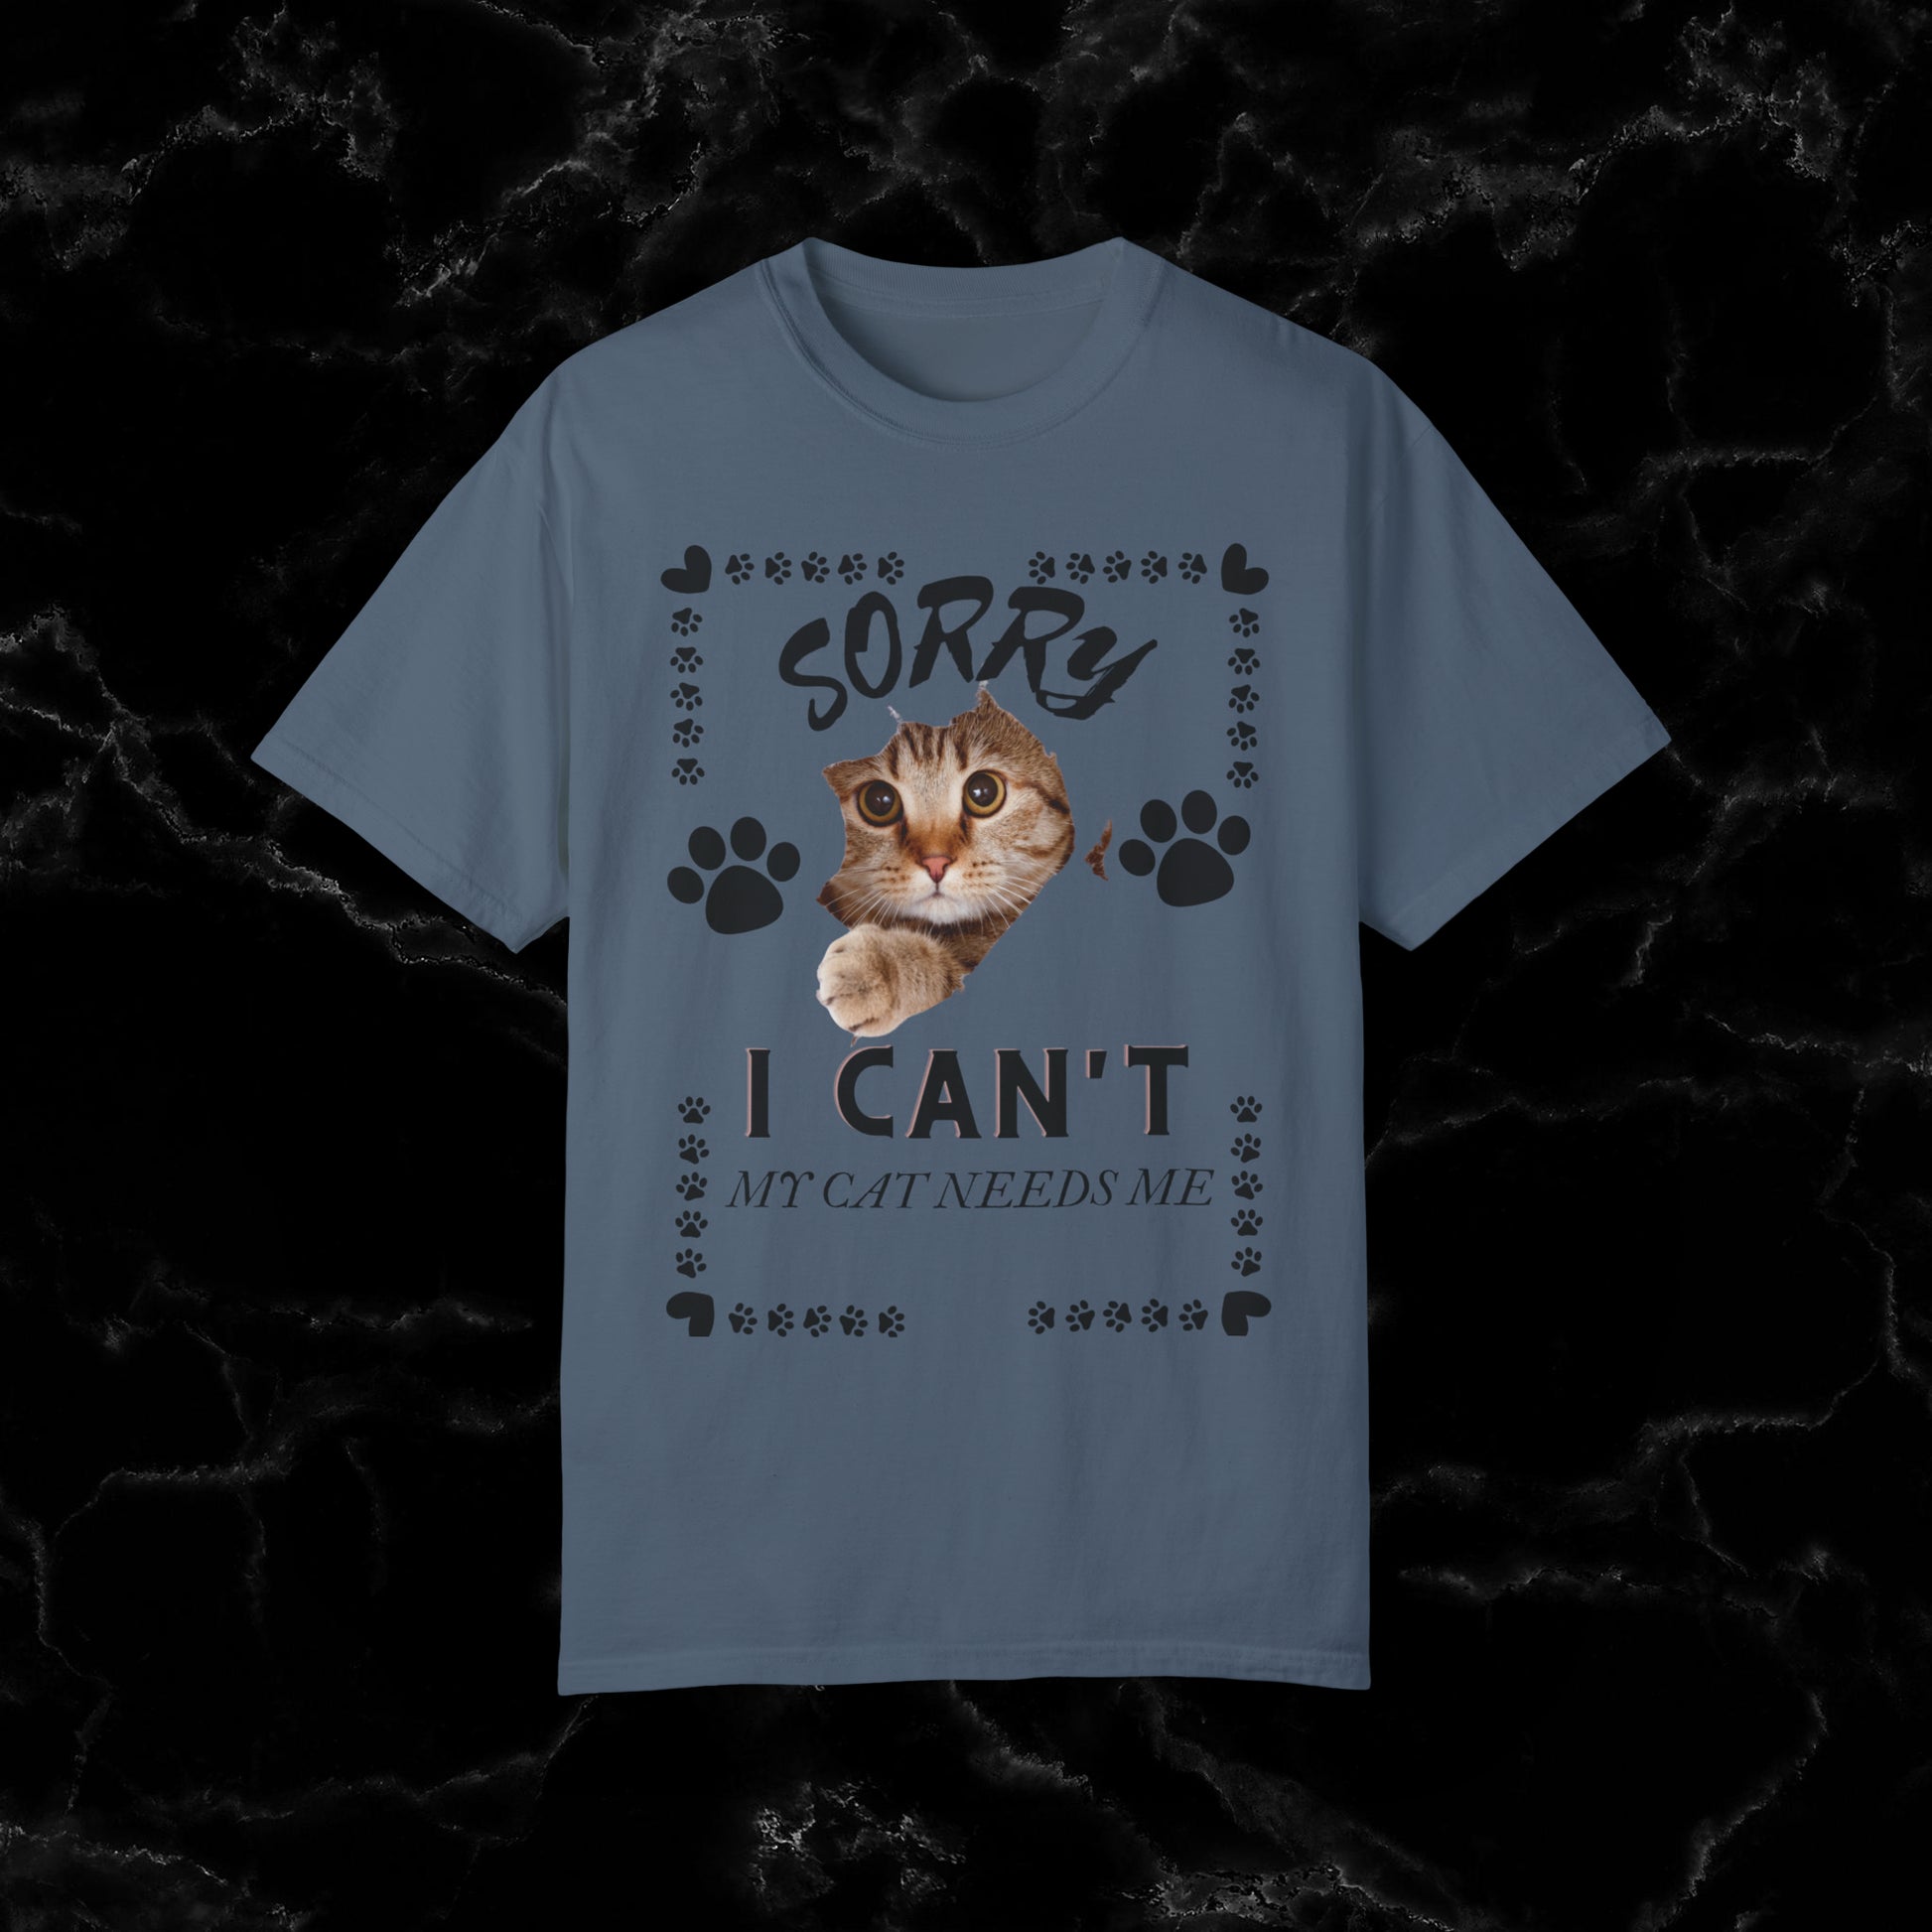 Sorry I Can't, My Cat Needs Me T-Shirt - Perfect Gift for Cat Moms and Animal Lovers T-Shirt Blue Jean S 